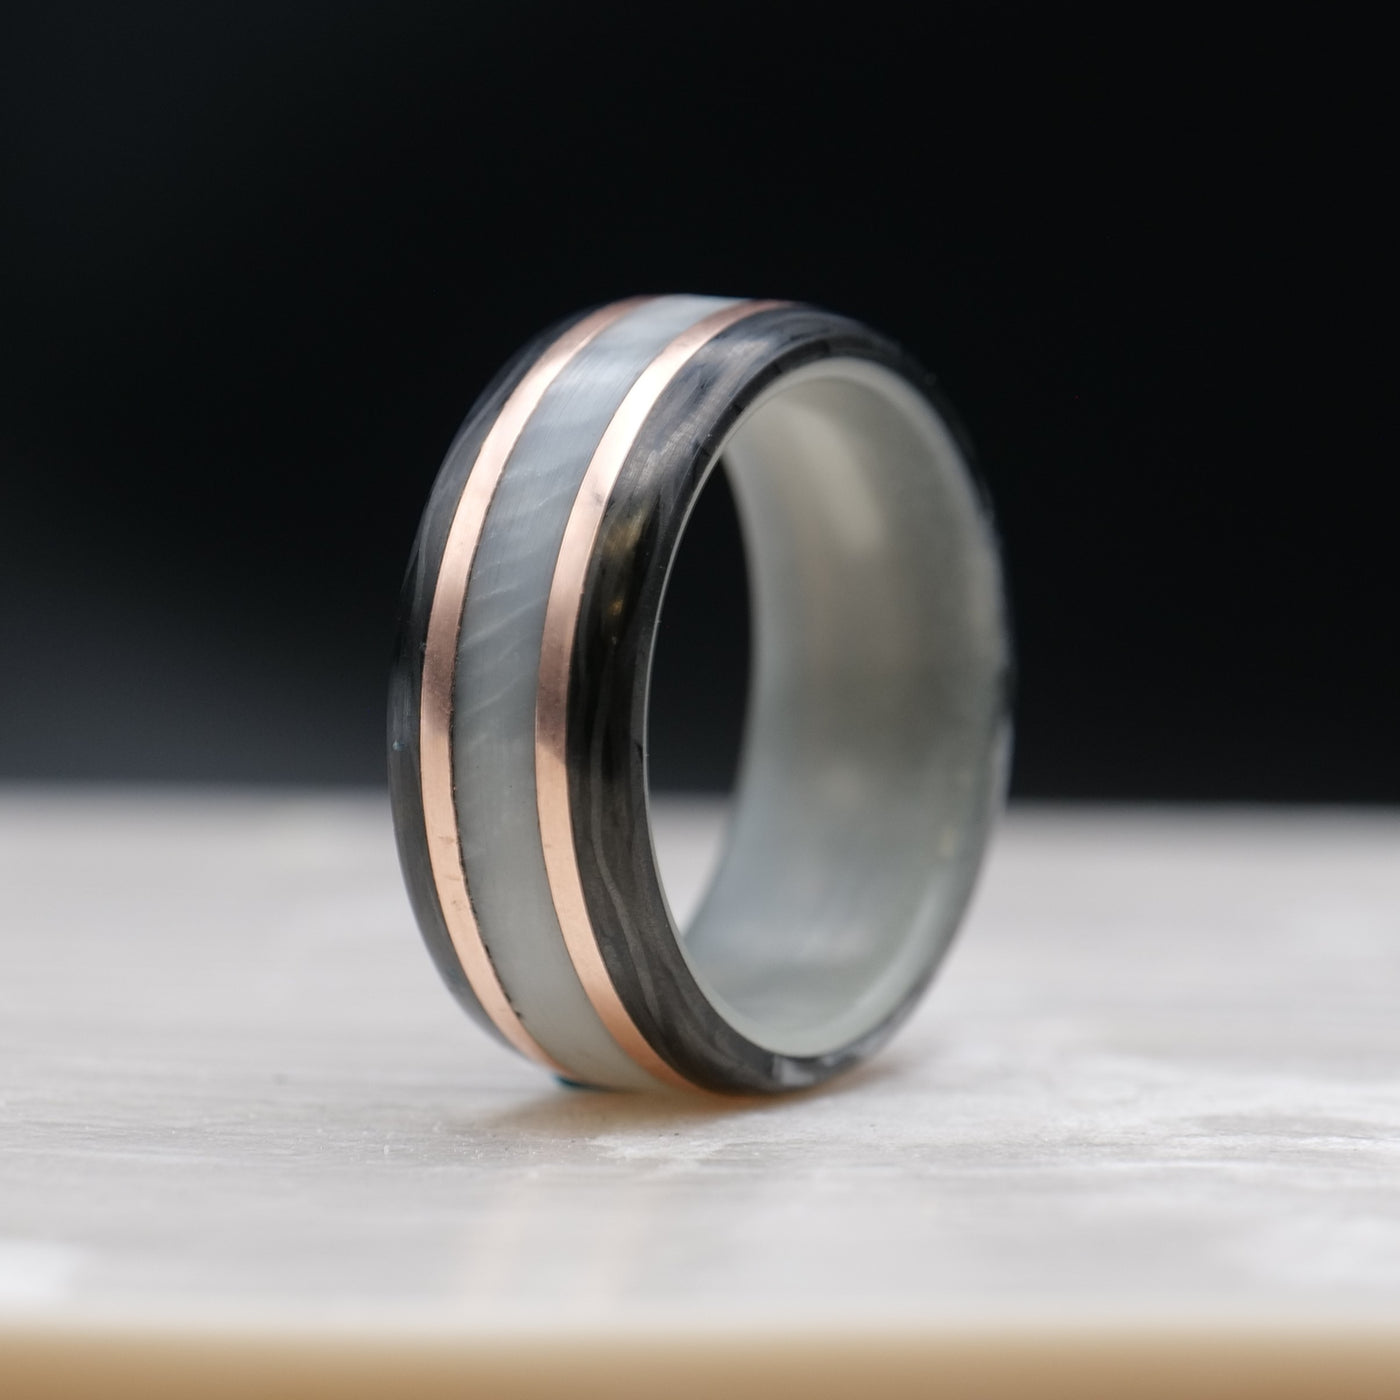 The Mother of Pearl | Trustone, Carbon Fiber, and Gold Ring - Patrick Adair Designs